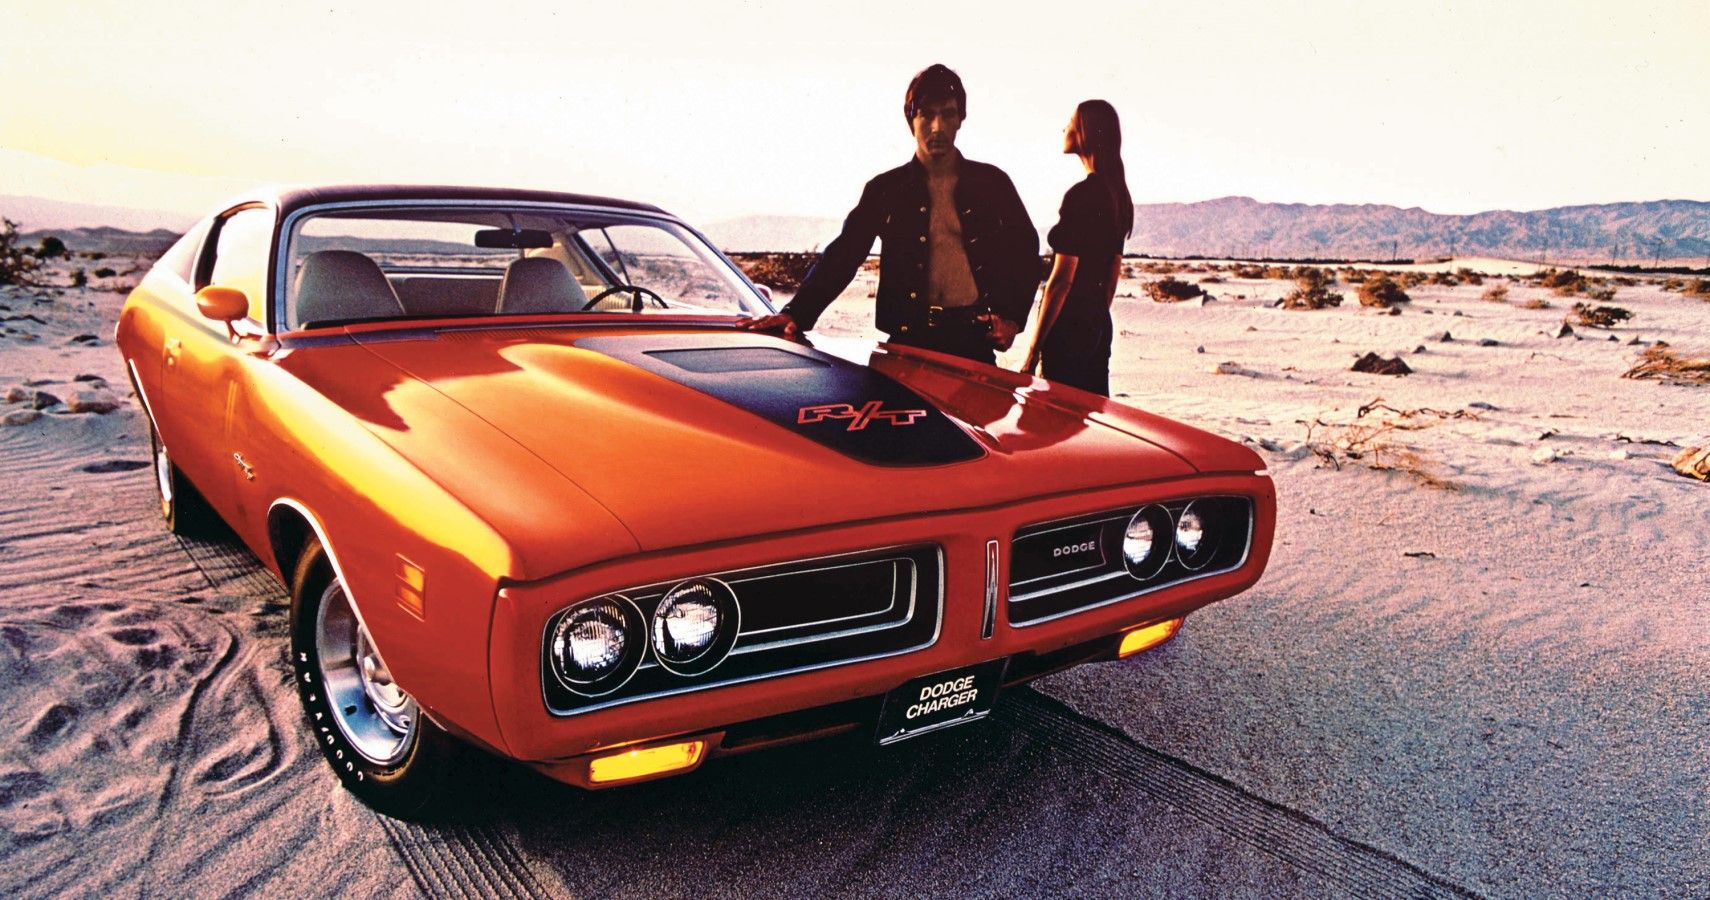 1971 Dodge Charger R/T front third quarter poster image